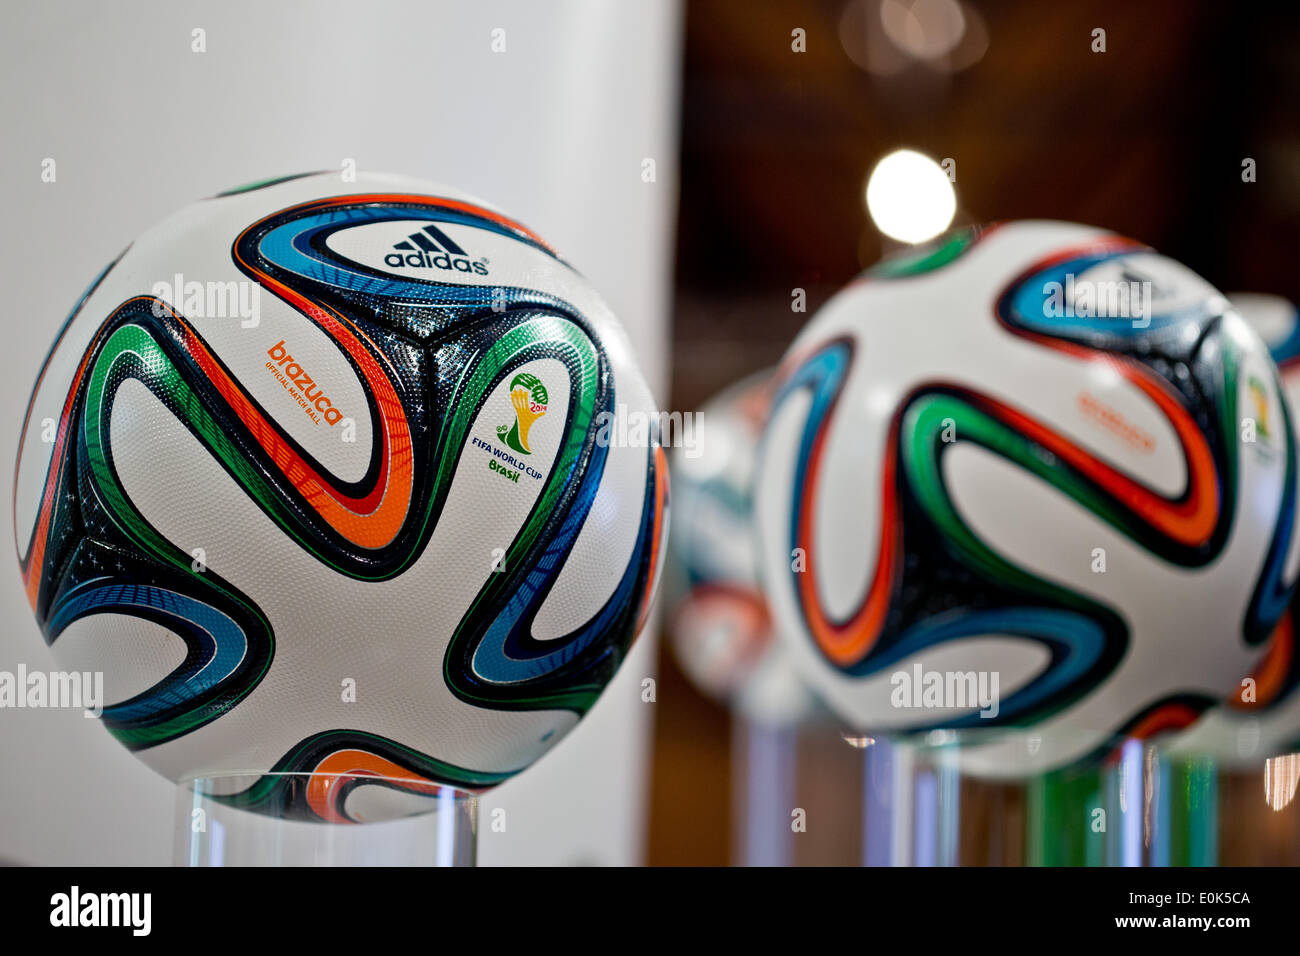 Fuerth, Germany. 08th May, 2014. The official ball for the upcoming soccer world championships in Brazil, the 'Brazuca', is pictured during the general meeting of sporting goods manufacturer adidas in Fuerth, Germany, 08 May 2014. Photo: DANIEL KARMANN/dpa/Alamy Live News Stock Photo